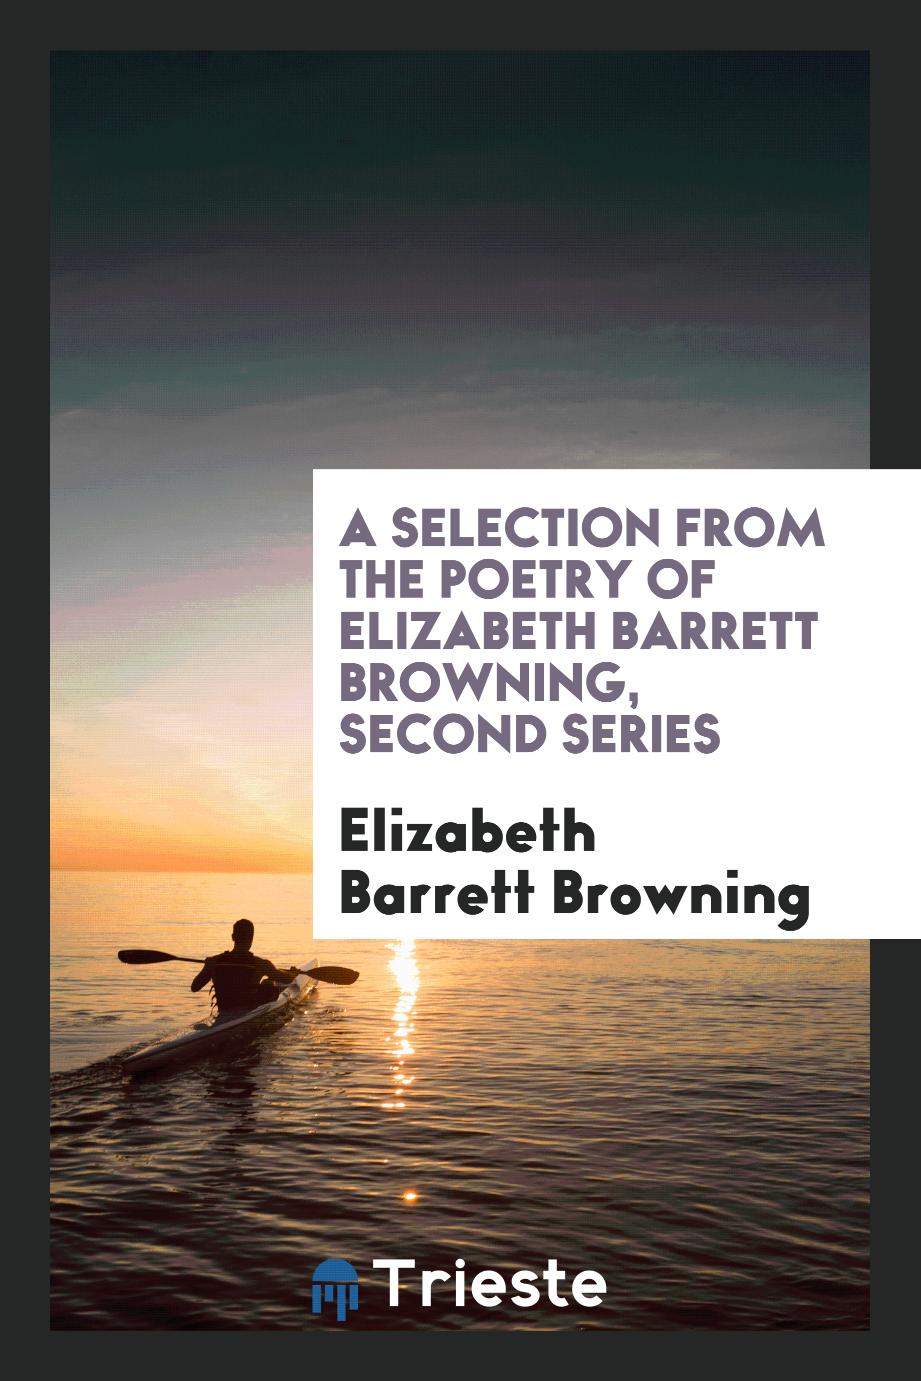 A selection from the poetry of Elizabeth Barrett Browning, second series